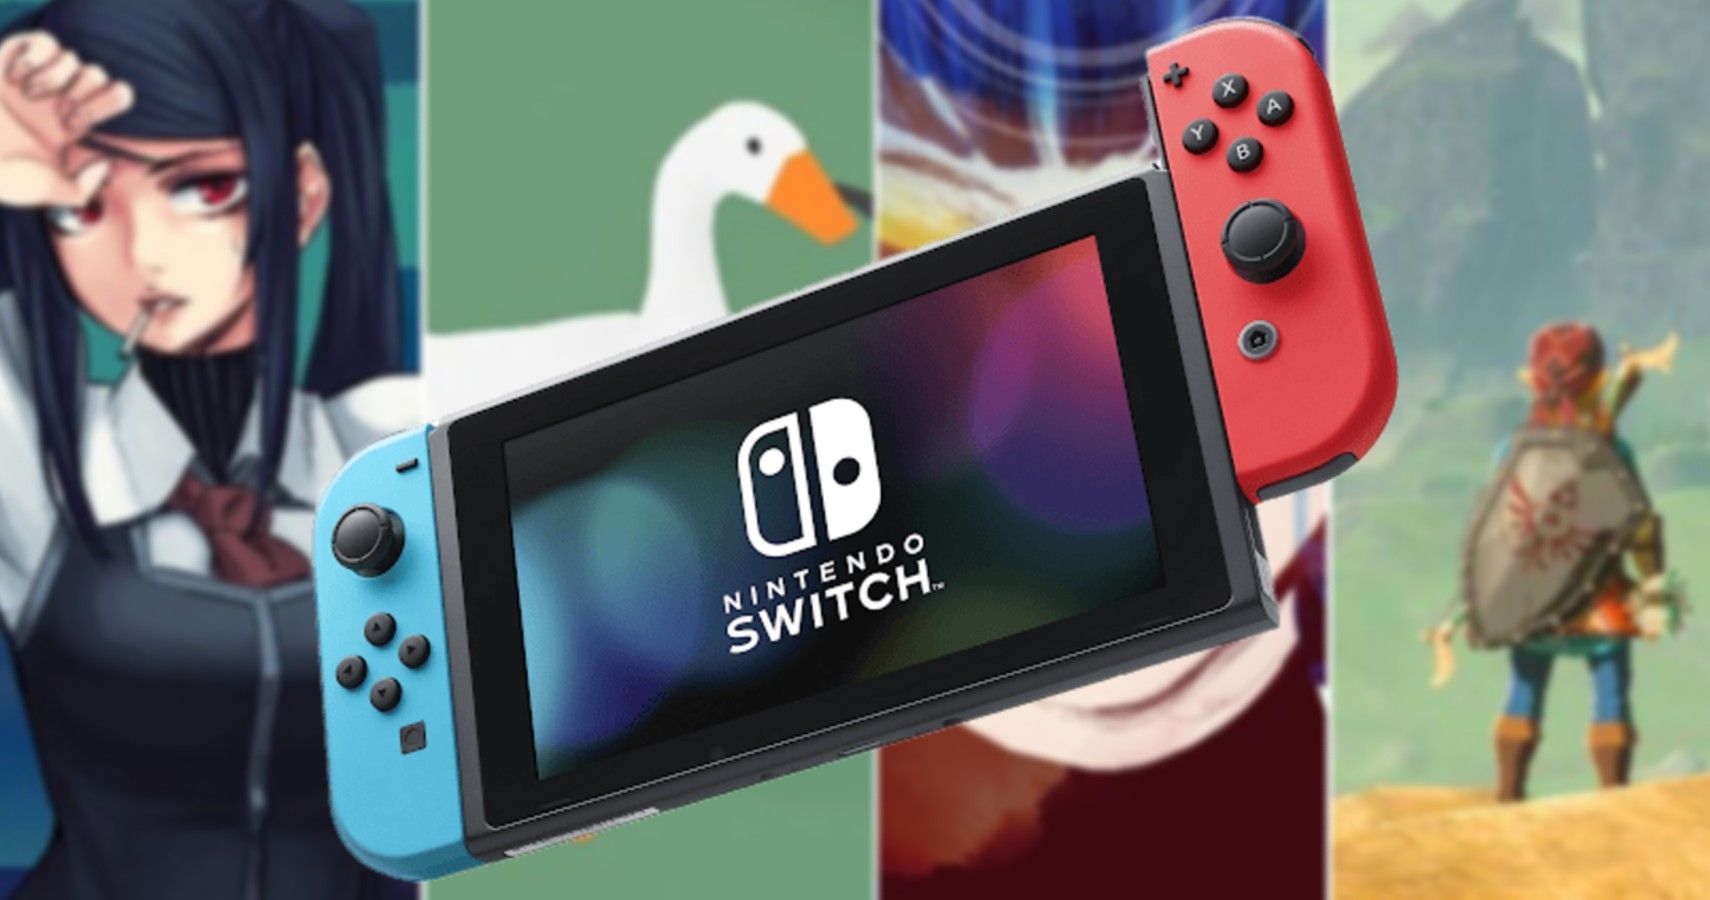 If You Thought Last Year Was Sad For Switch, 2023 Might Be Hard